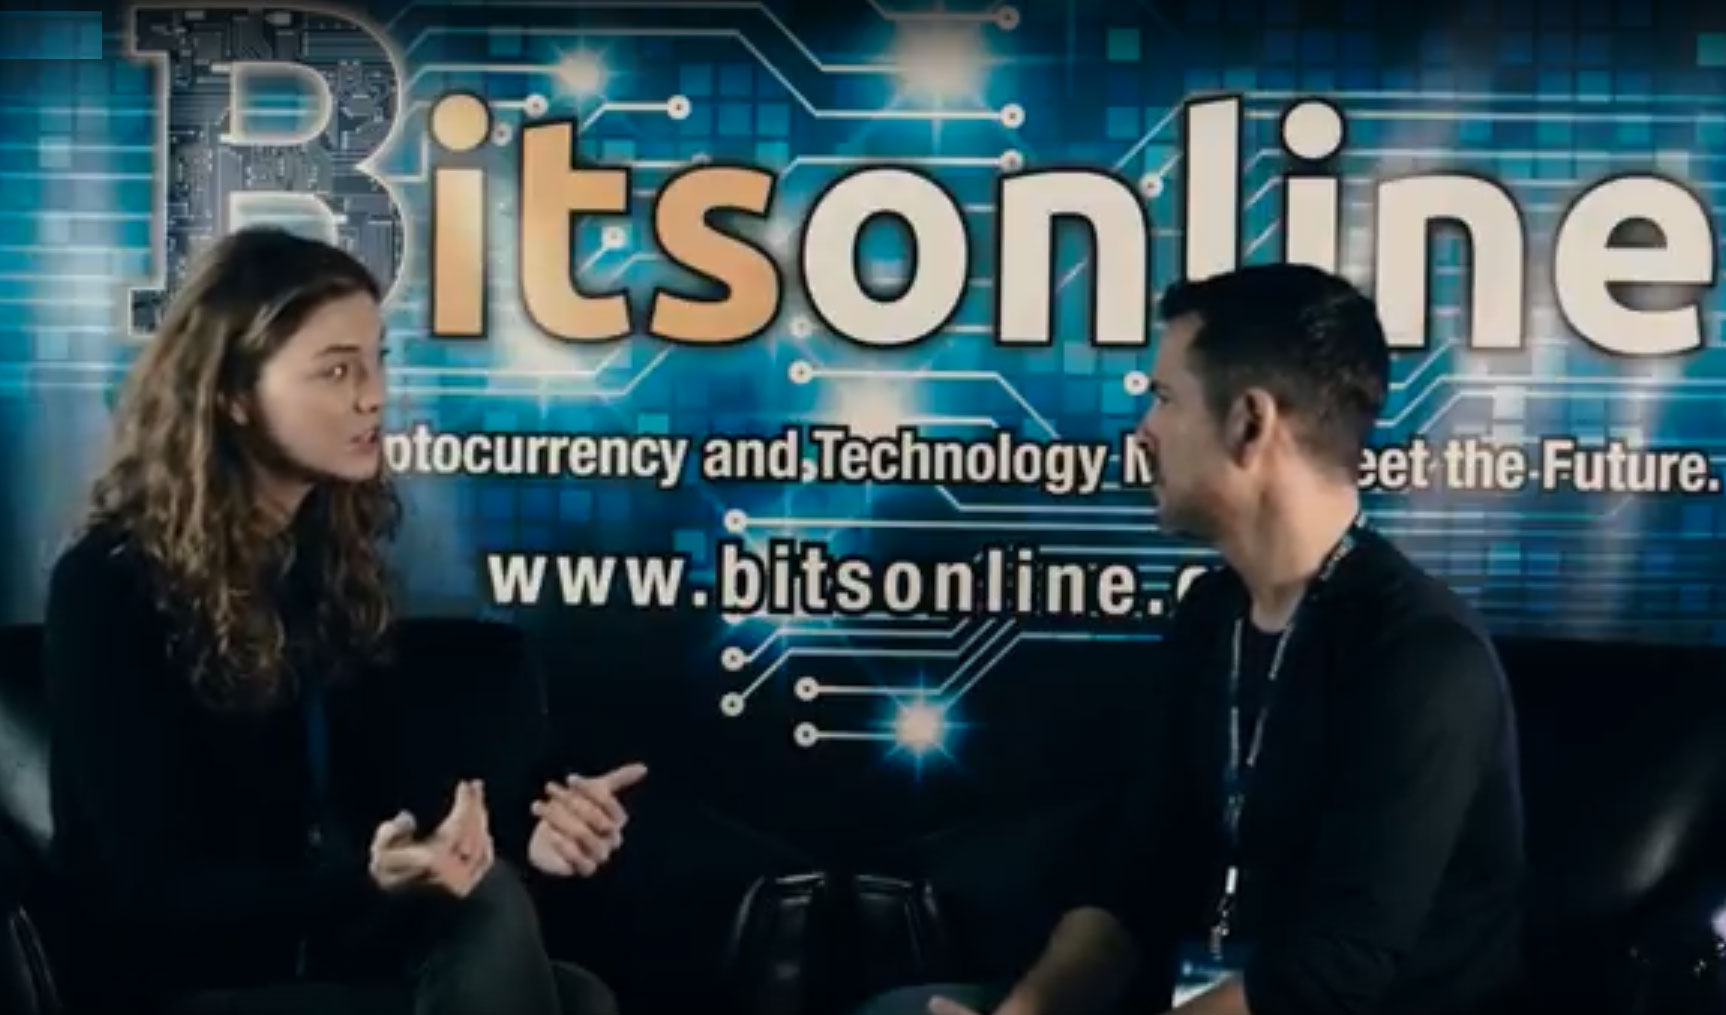 George Levy with Arwen Smit of DOVU at The North American Bitcoin Conference